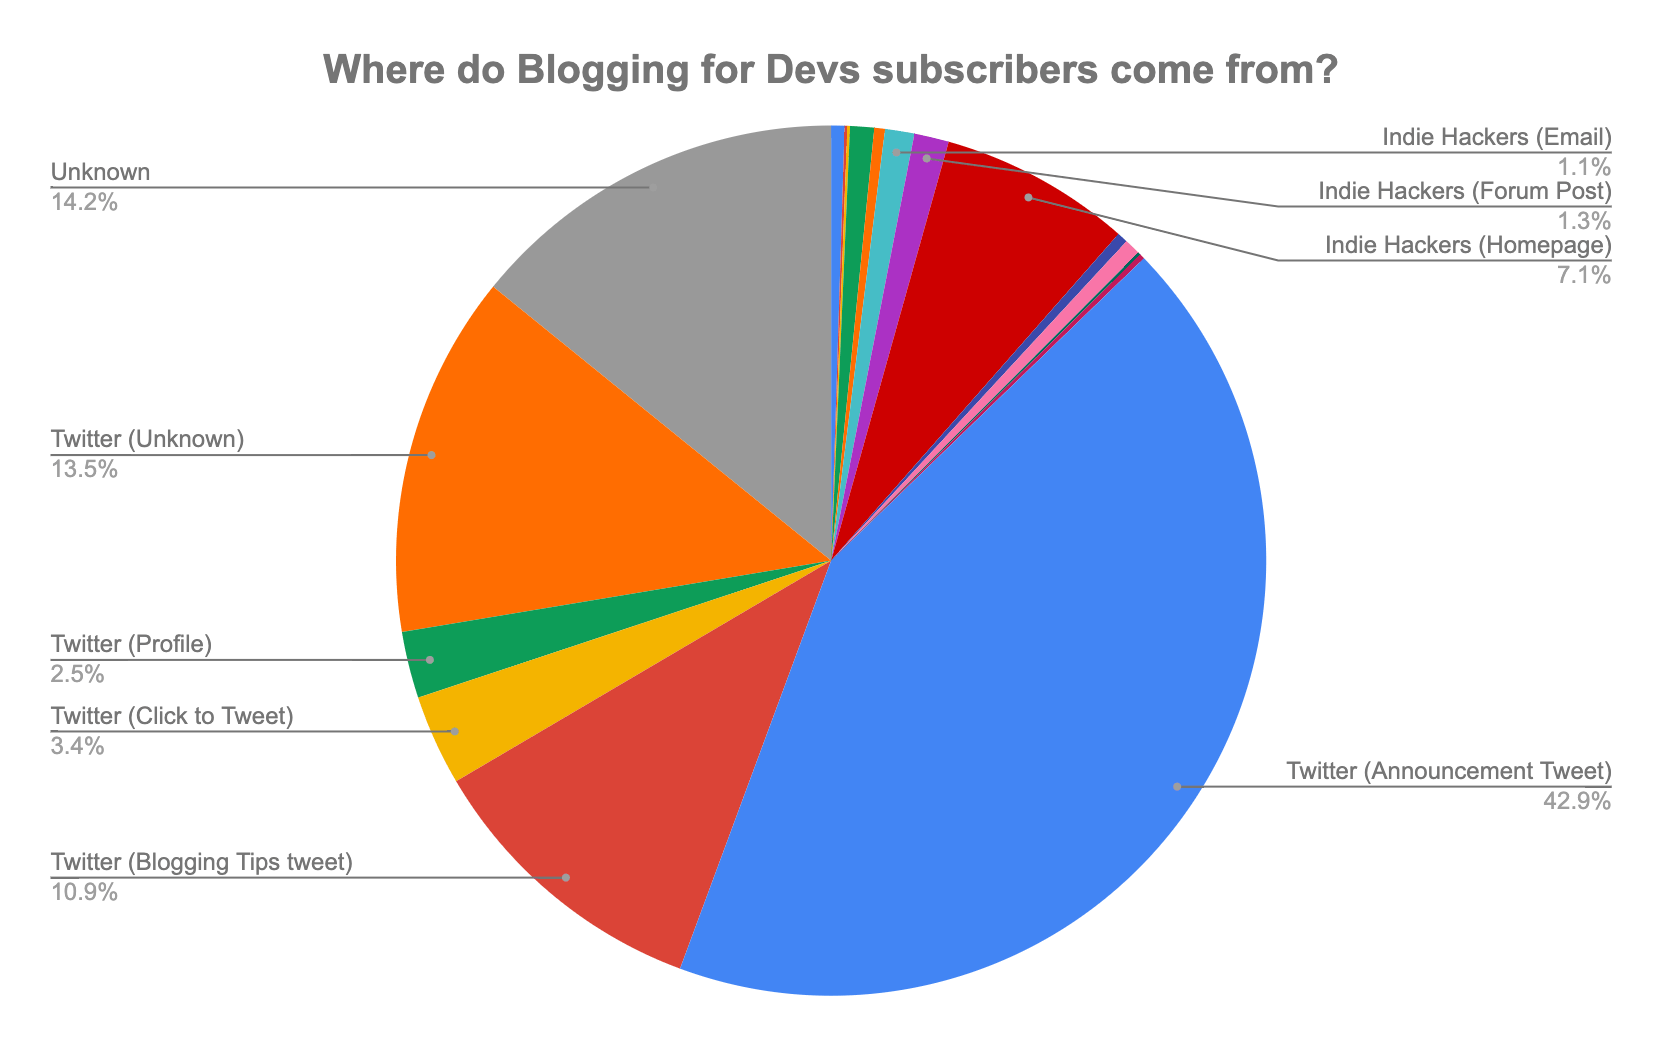 Where did subscribers come from?